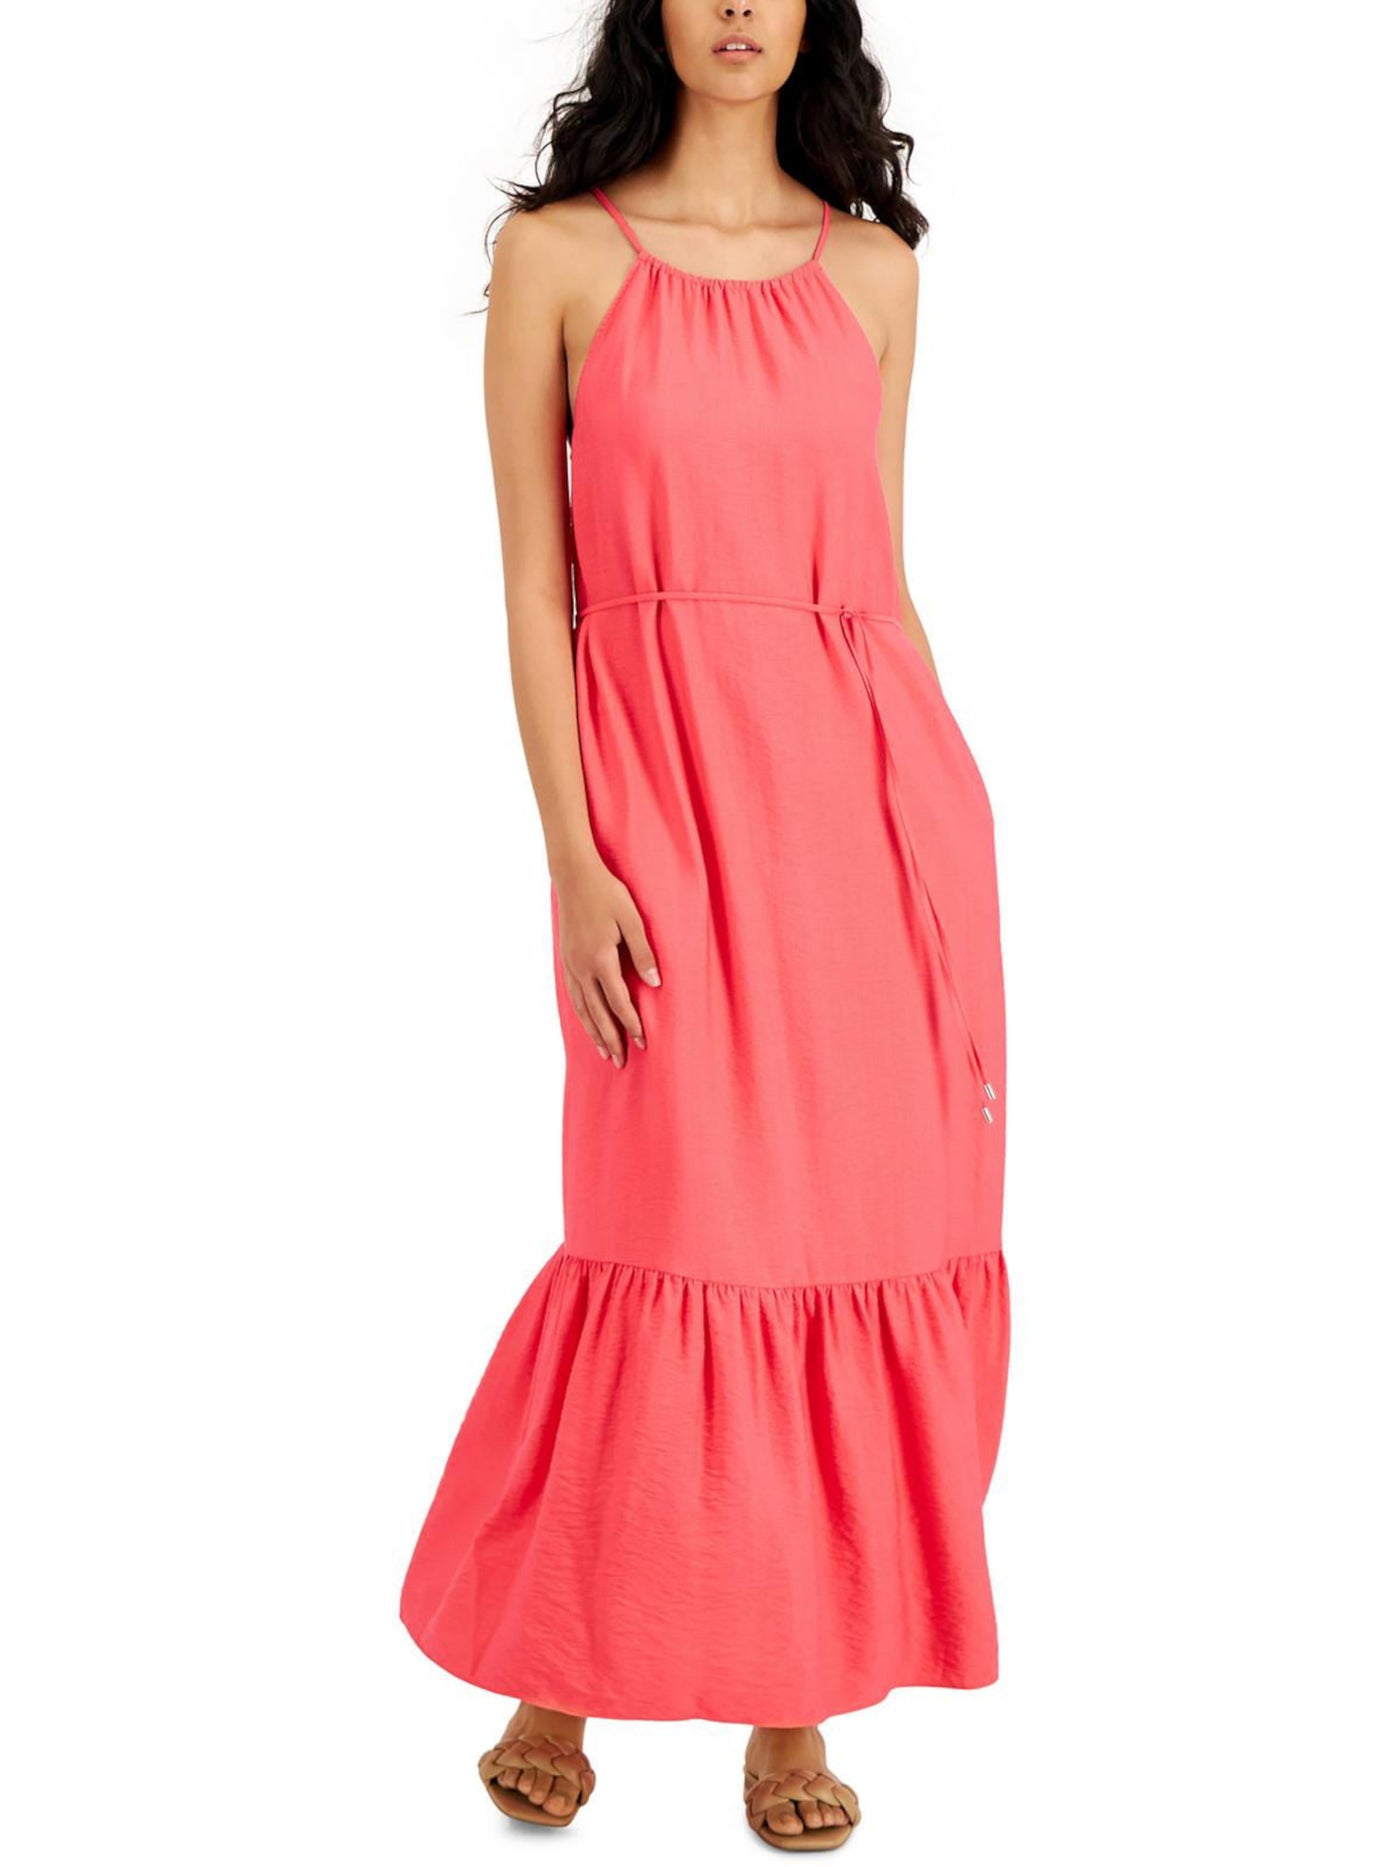 INC DRESSES Womens Pink Ruched Belted Tie Keyhole Back Tiered Hem Sleeveless Halter Maxi Shift Dress 10